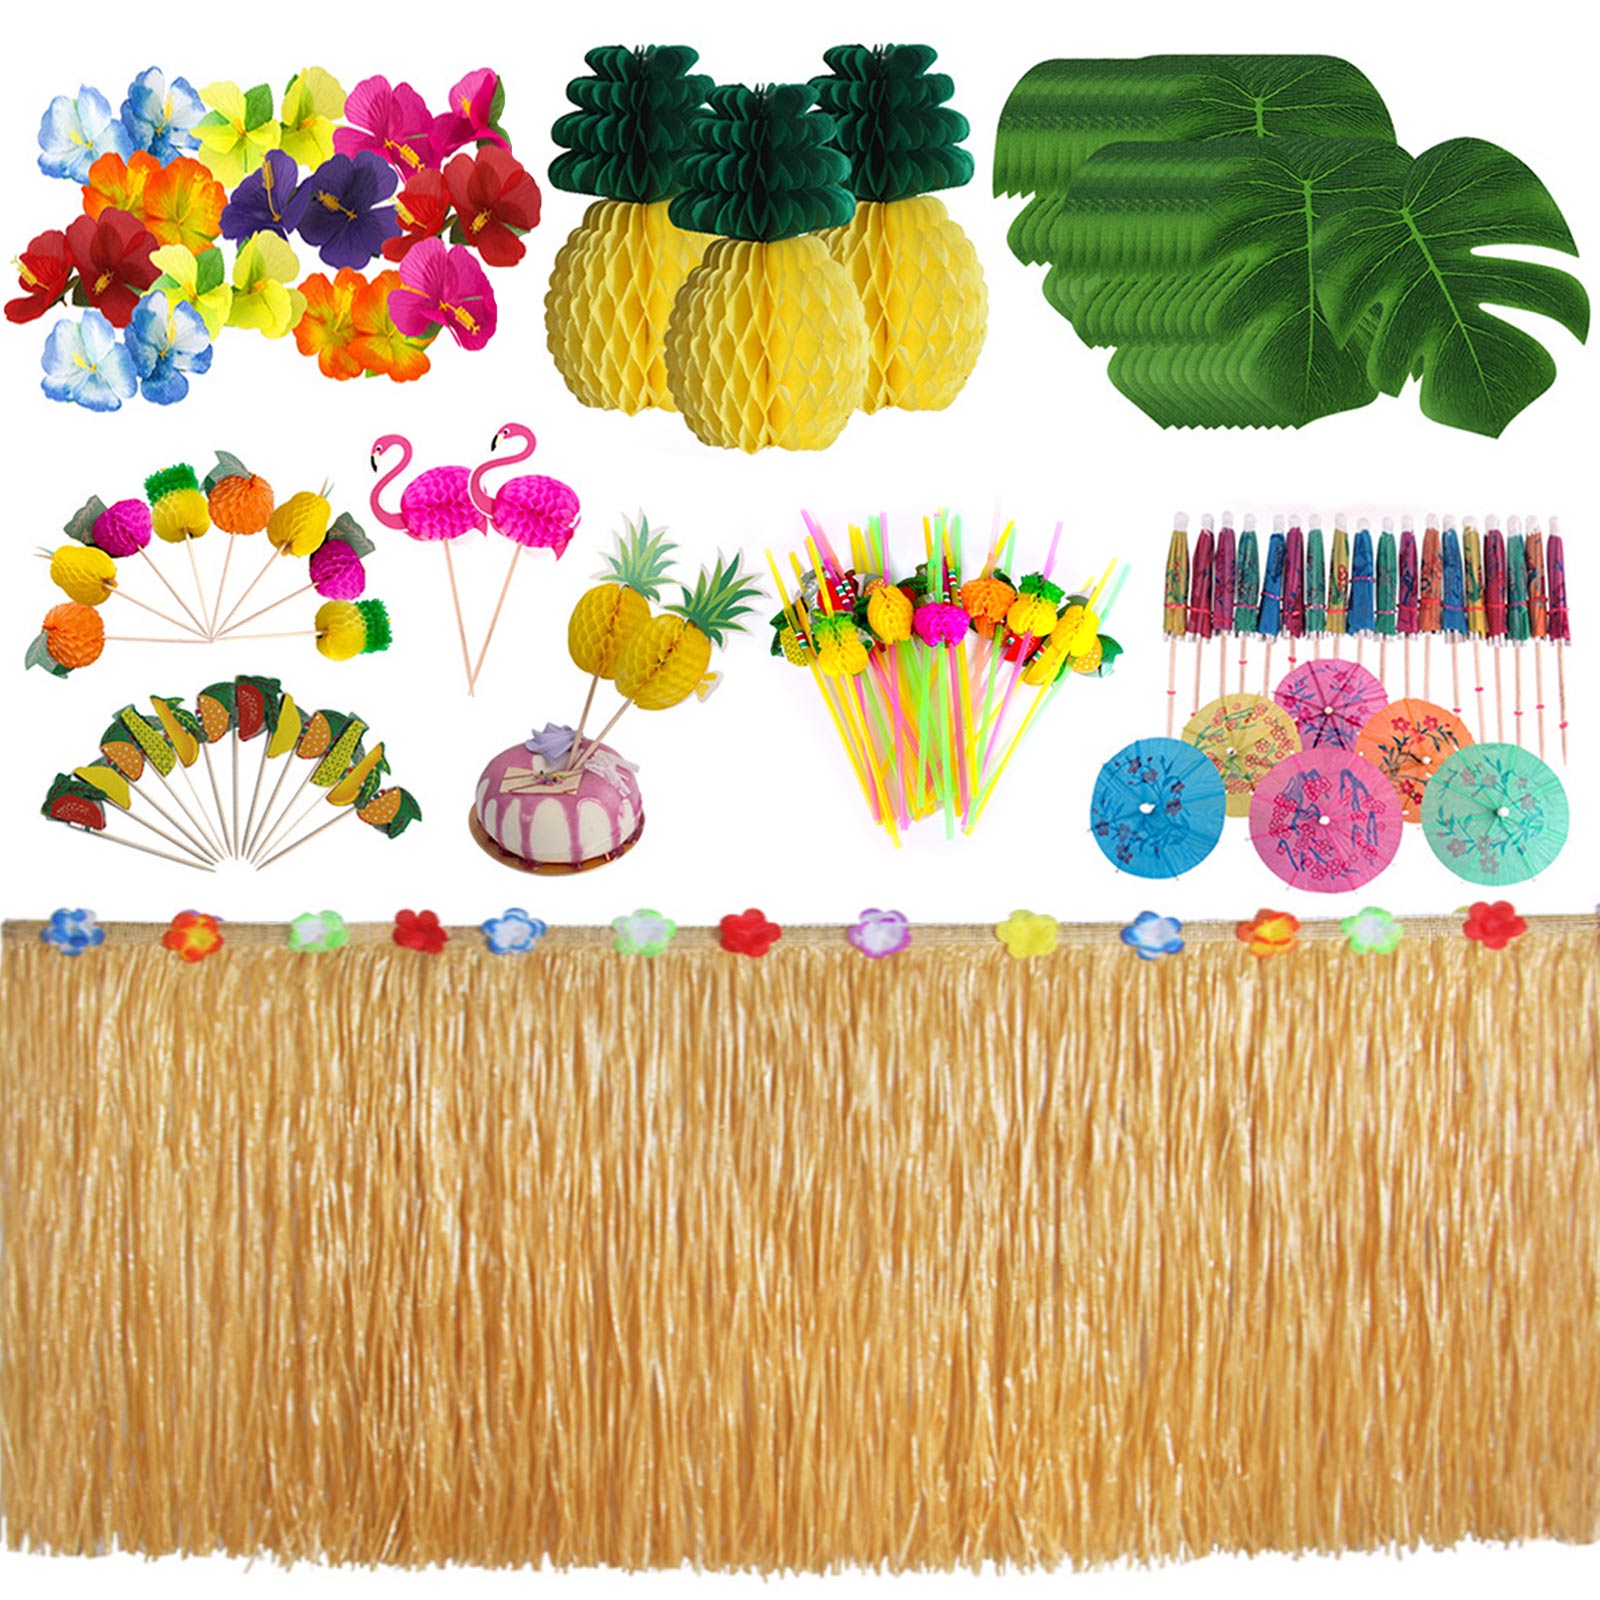 20 Pieces Tropical Palm Leaves Gift 5 Pieces Hook Loop MerryNine Hawaiian Party Decorations Set Including 9ft Table Skirt 